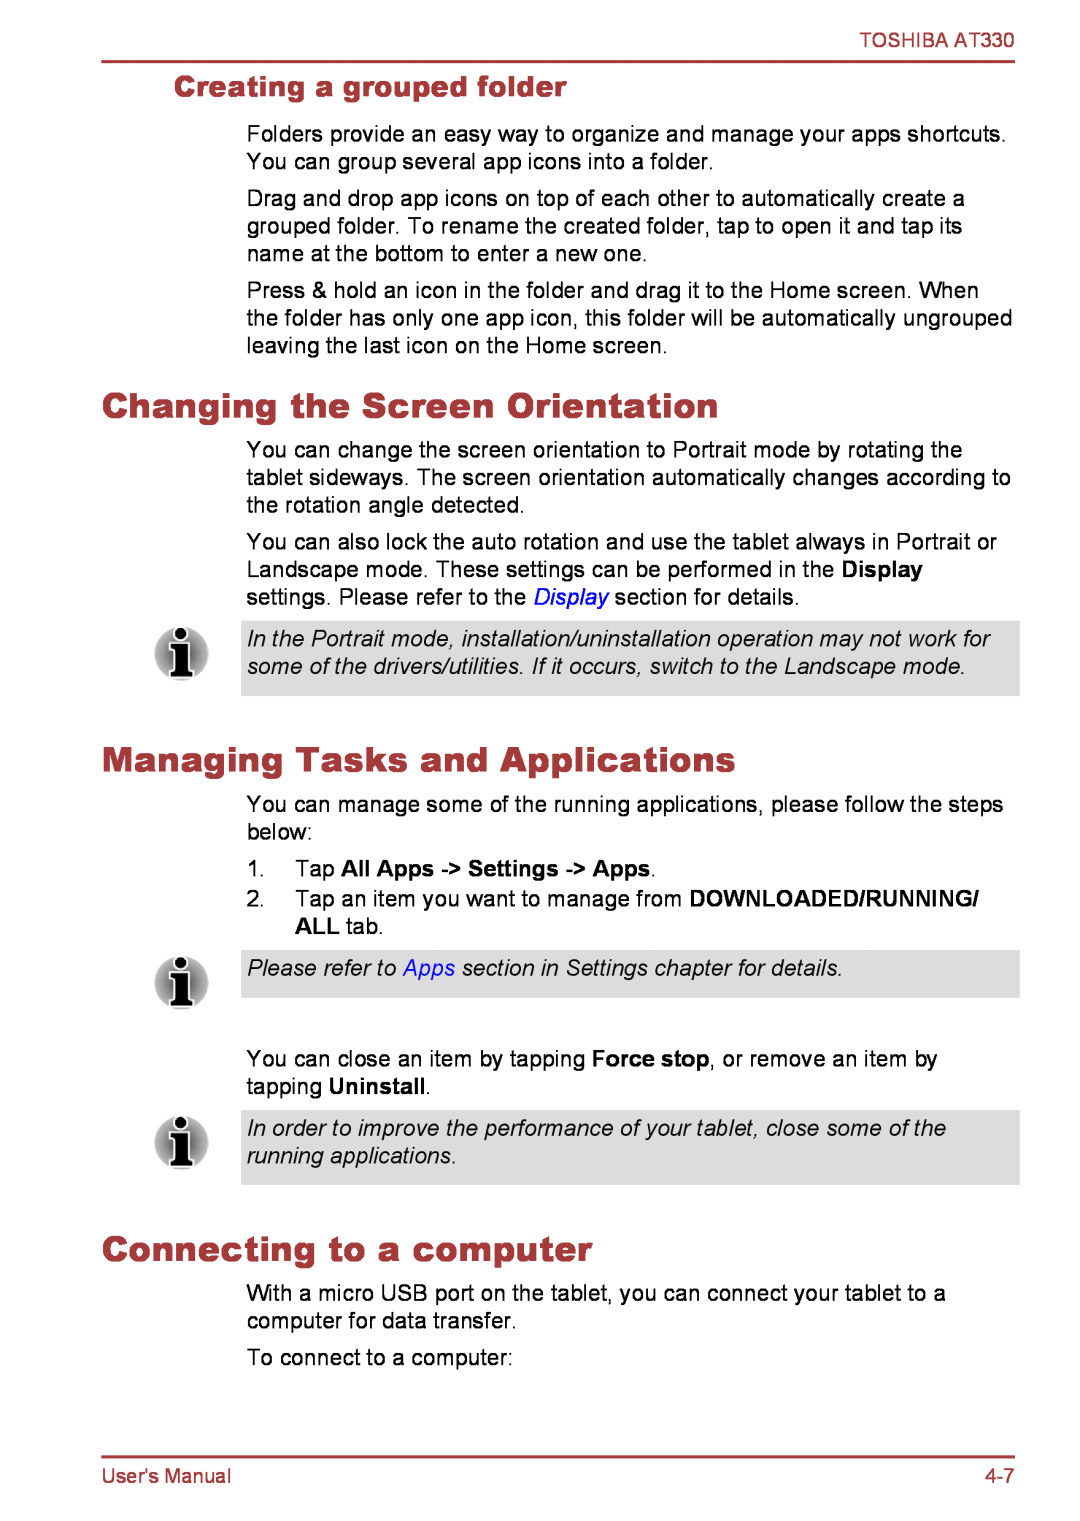 Toshiba at330 user manual Changing the Screen Orientation, Managing Tasks and Applications, Connecting to a computer 